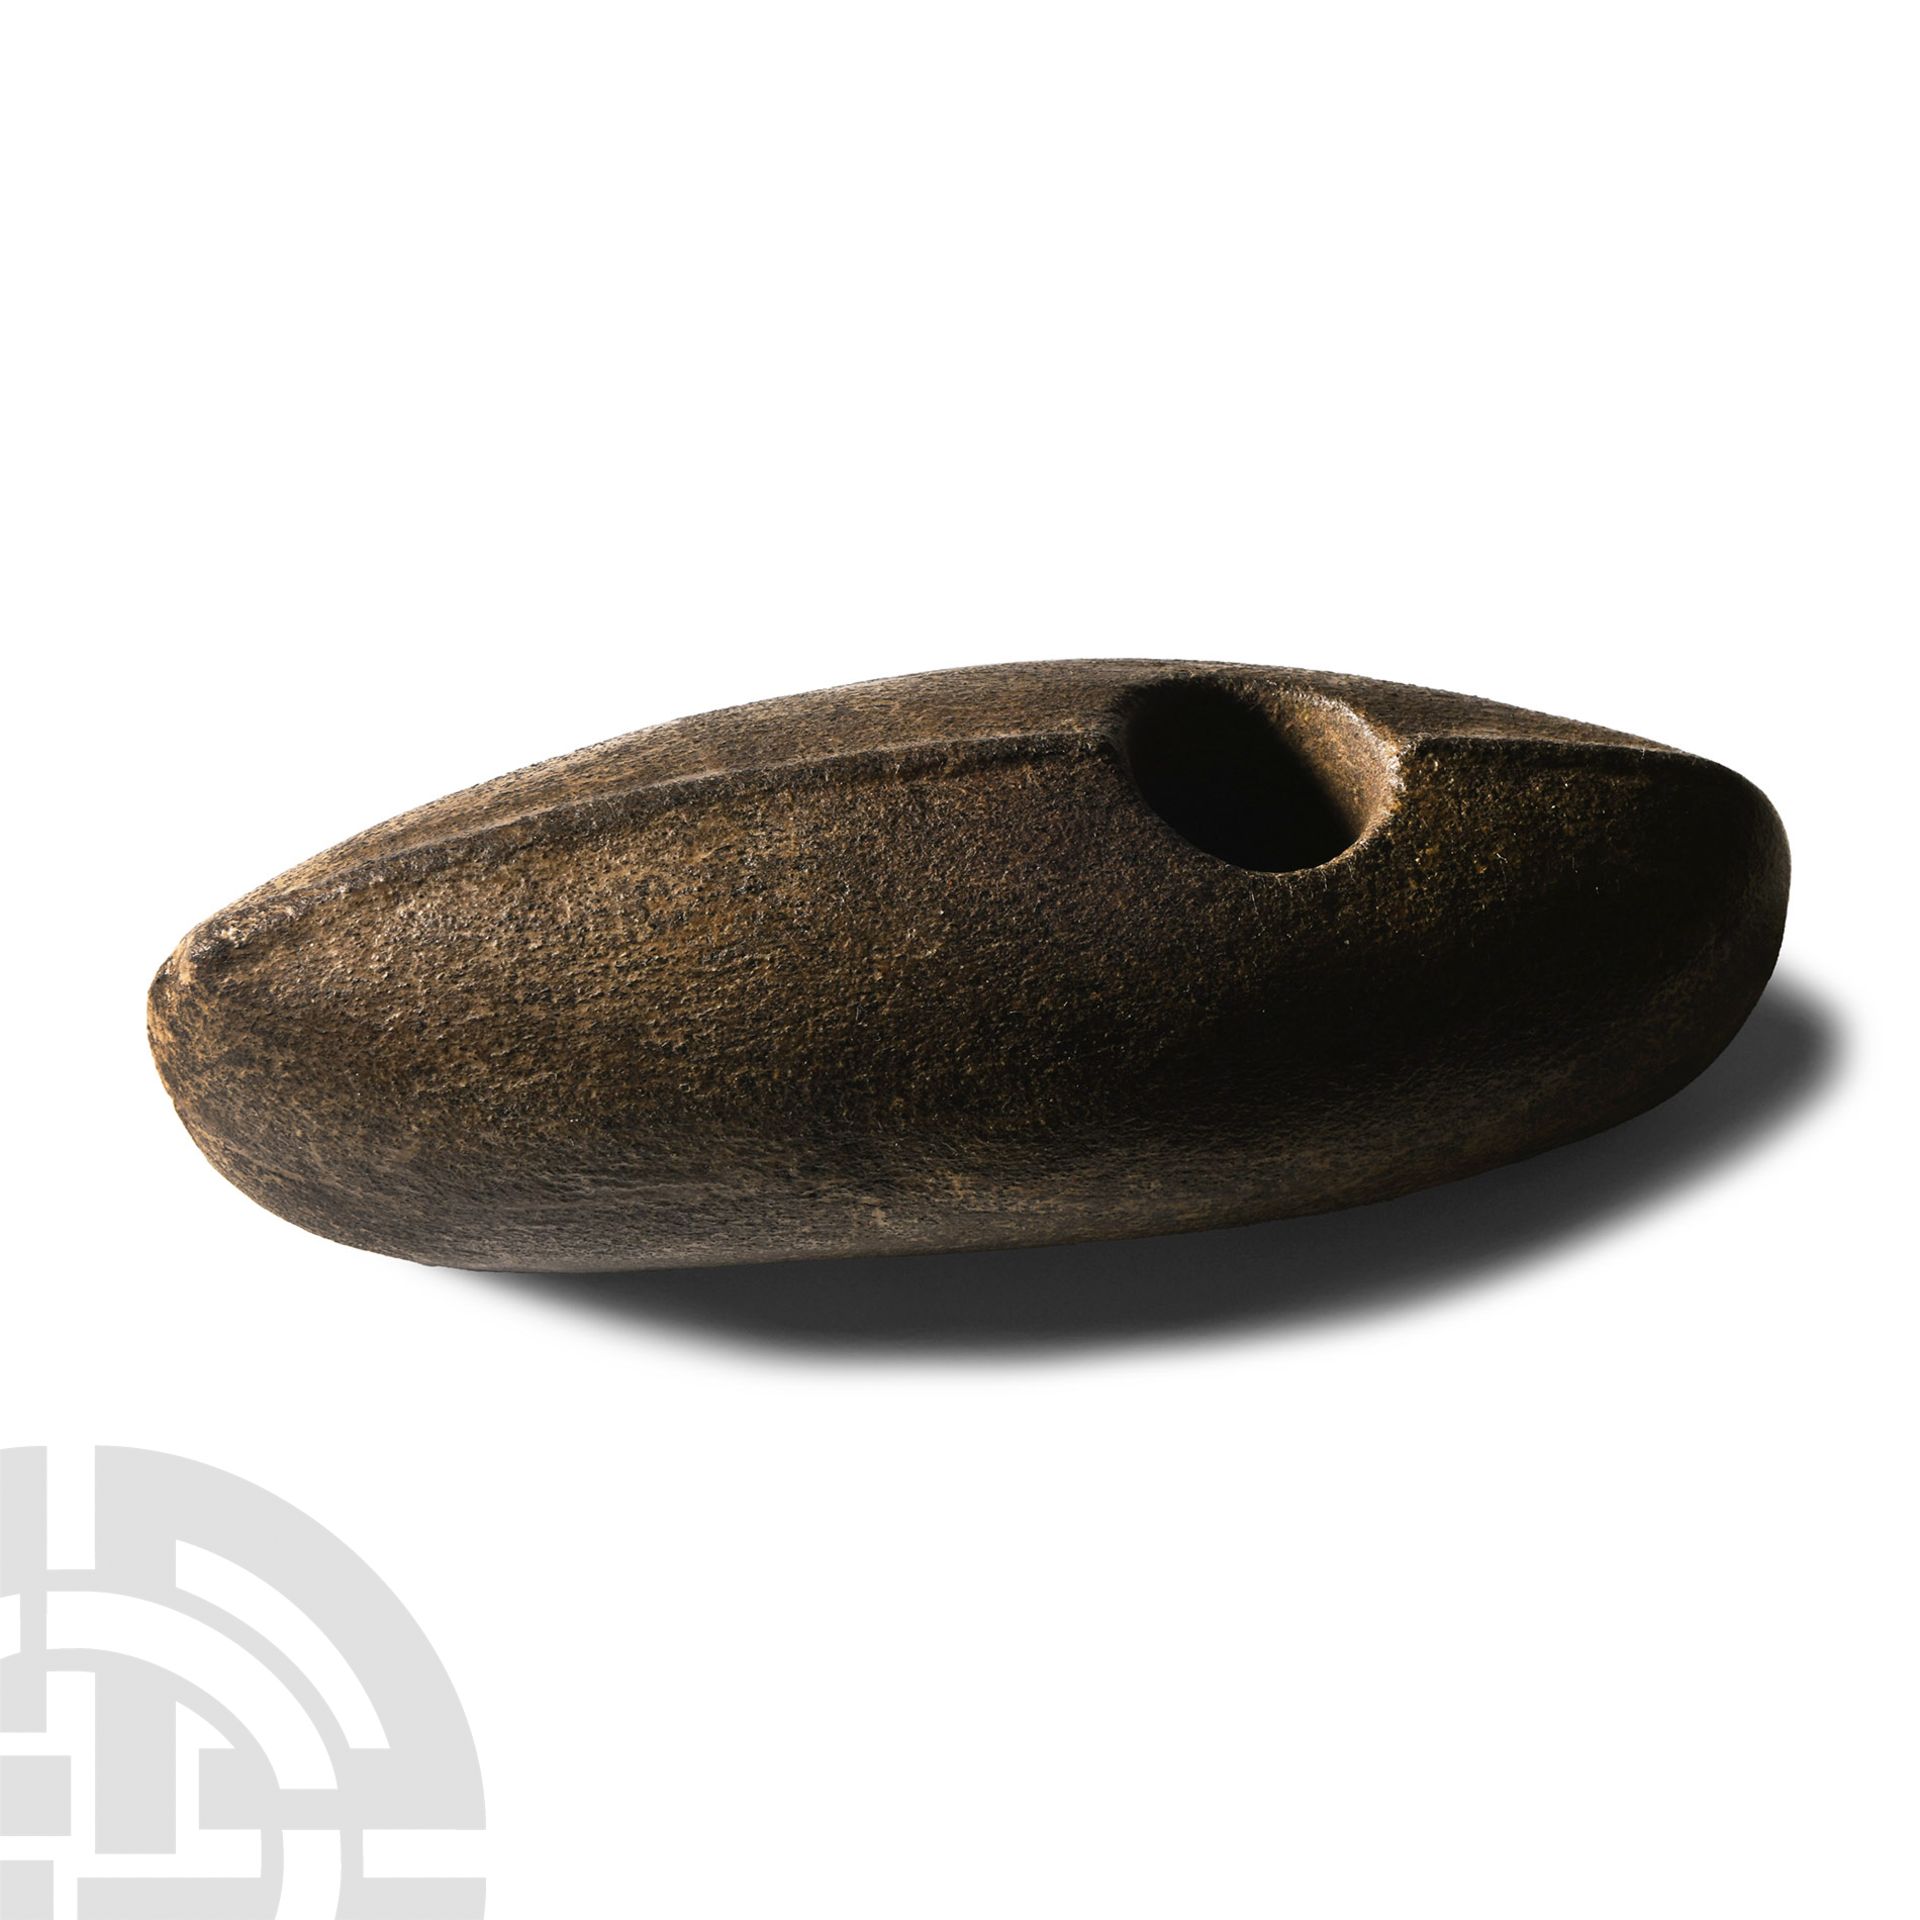 Stone Age Pierced Boat-Shaped Axehead - Image 2 of 2